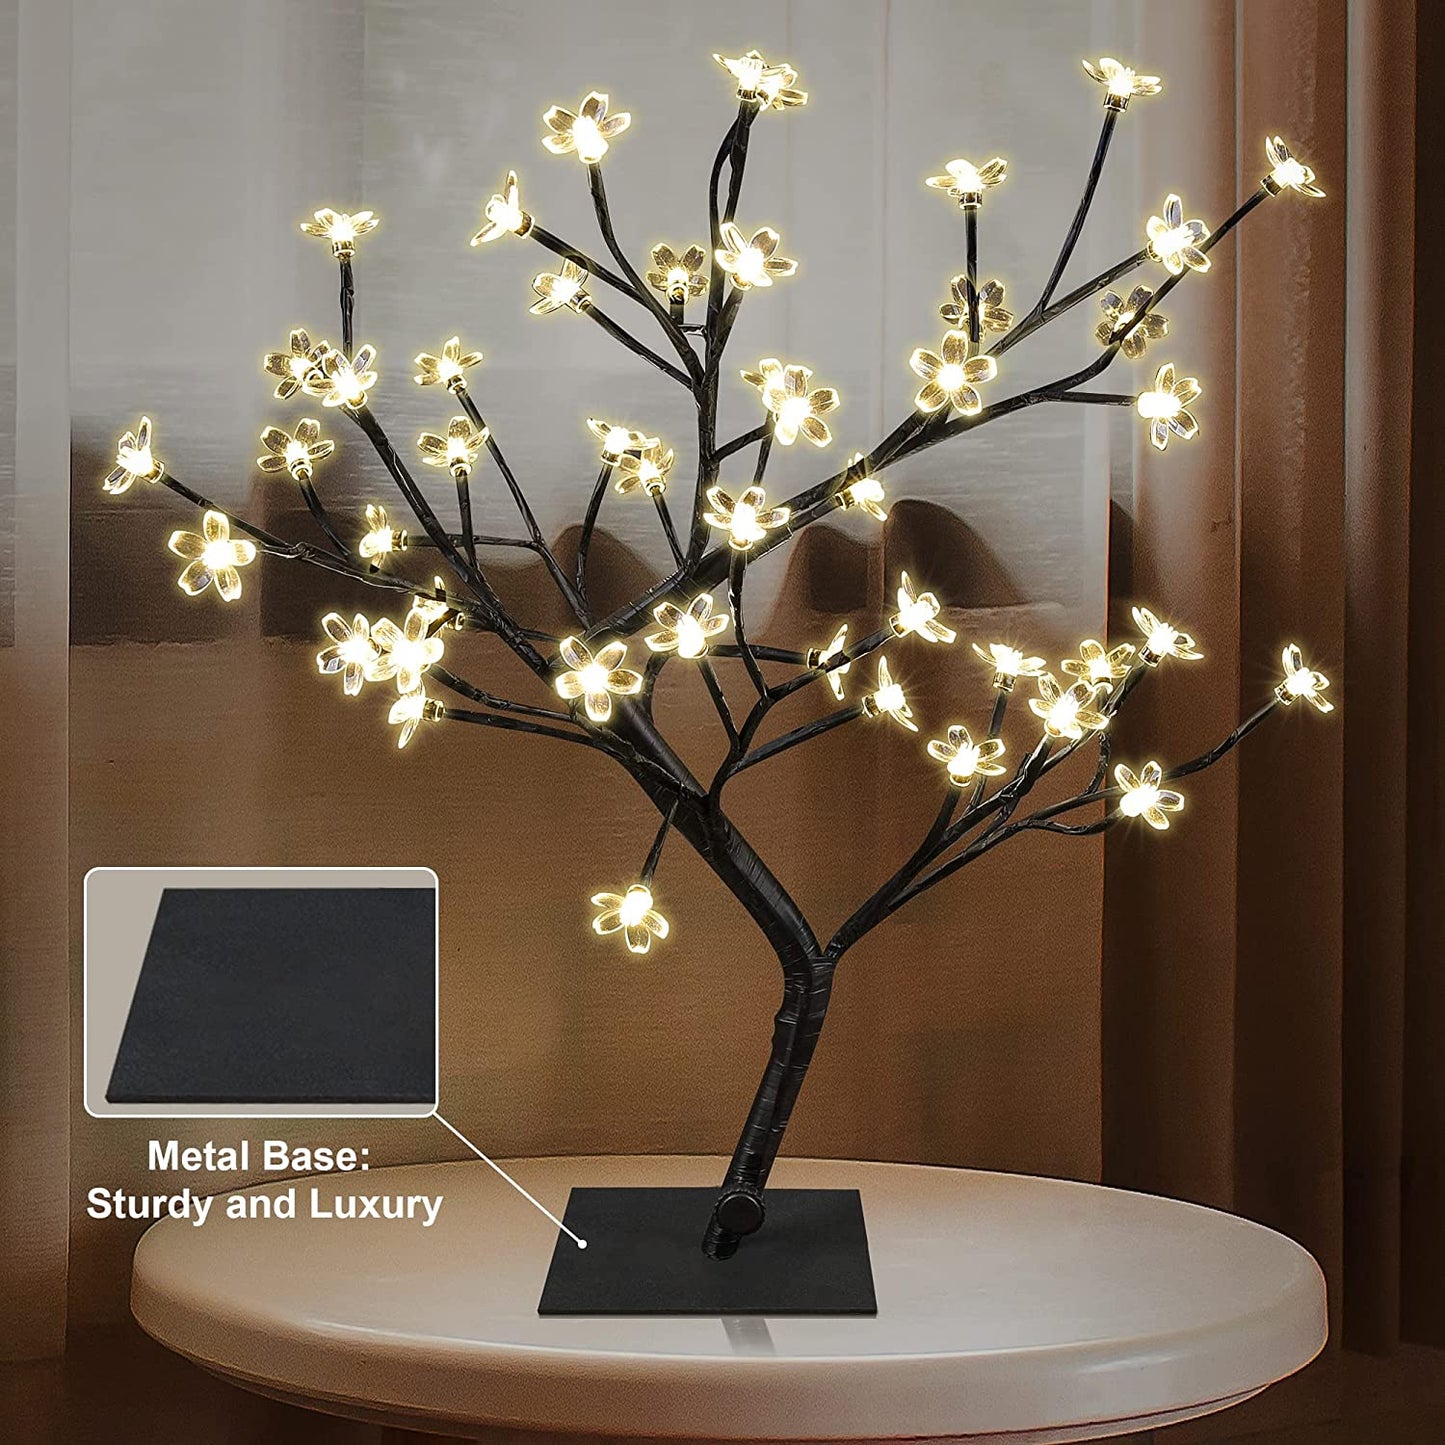 18 Inch Cherry Blossom Bonsai Tree, 48 LED Lights, 24V UL Listed Adapter Included, Metal Base, Warm White Lights, Ideal as Night Lights, Home Gift Idea